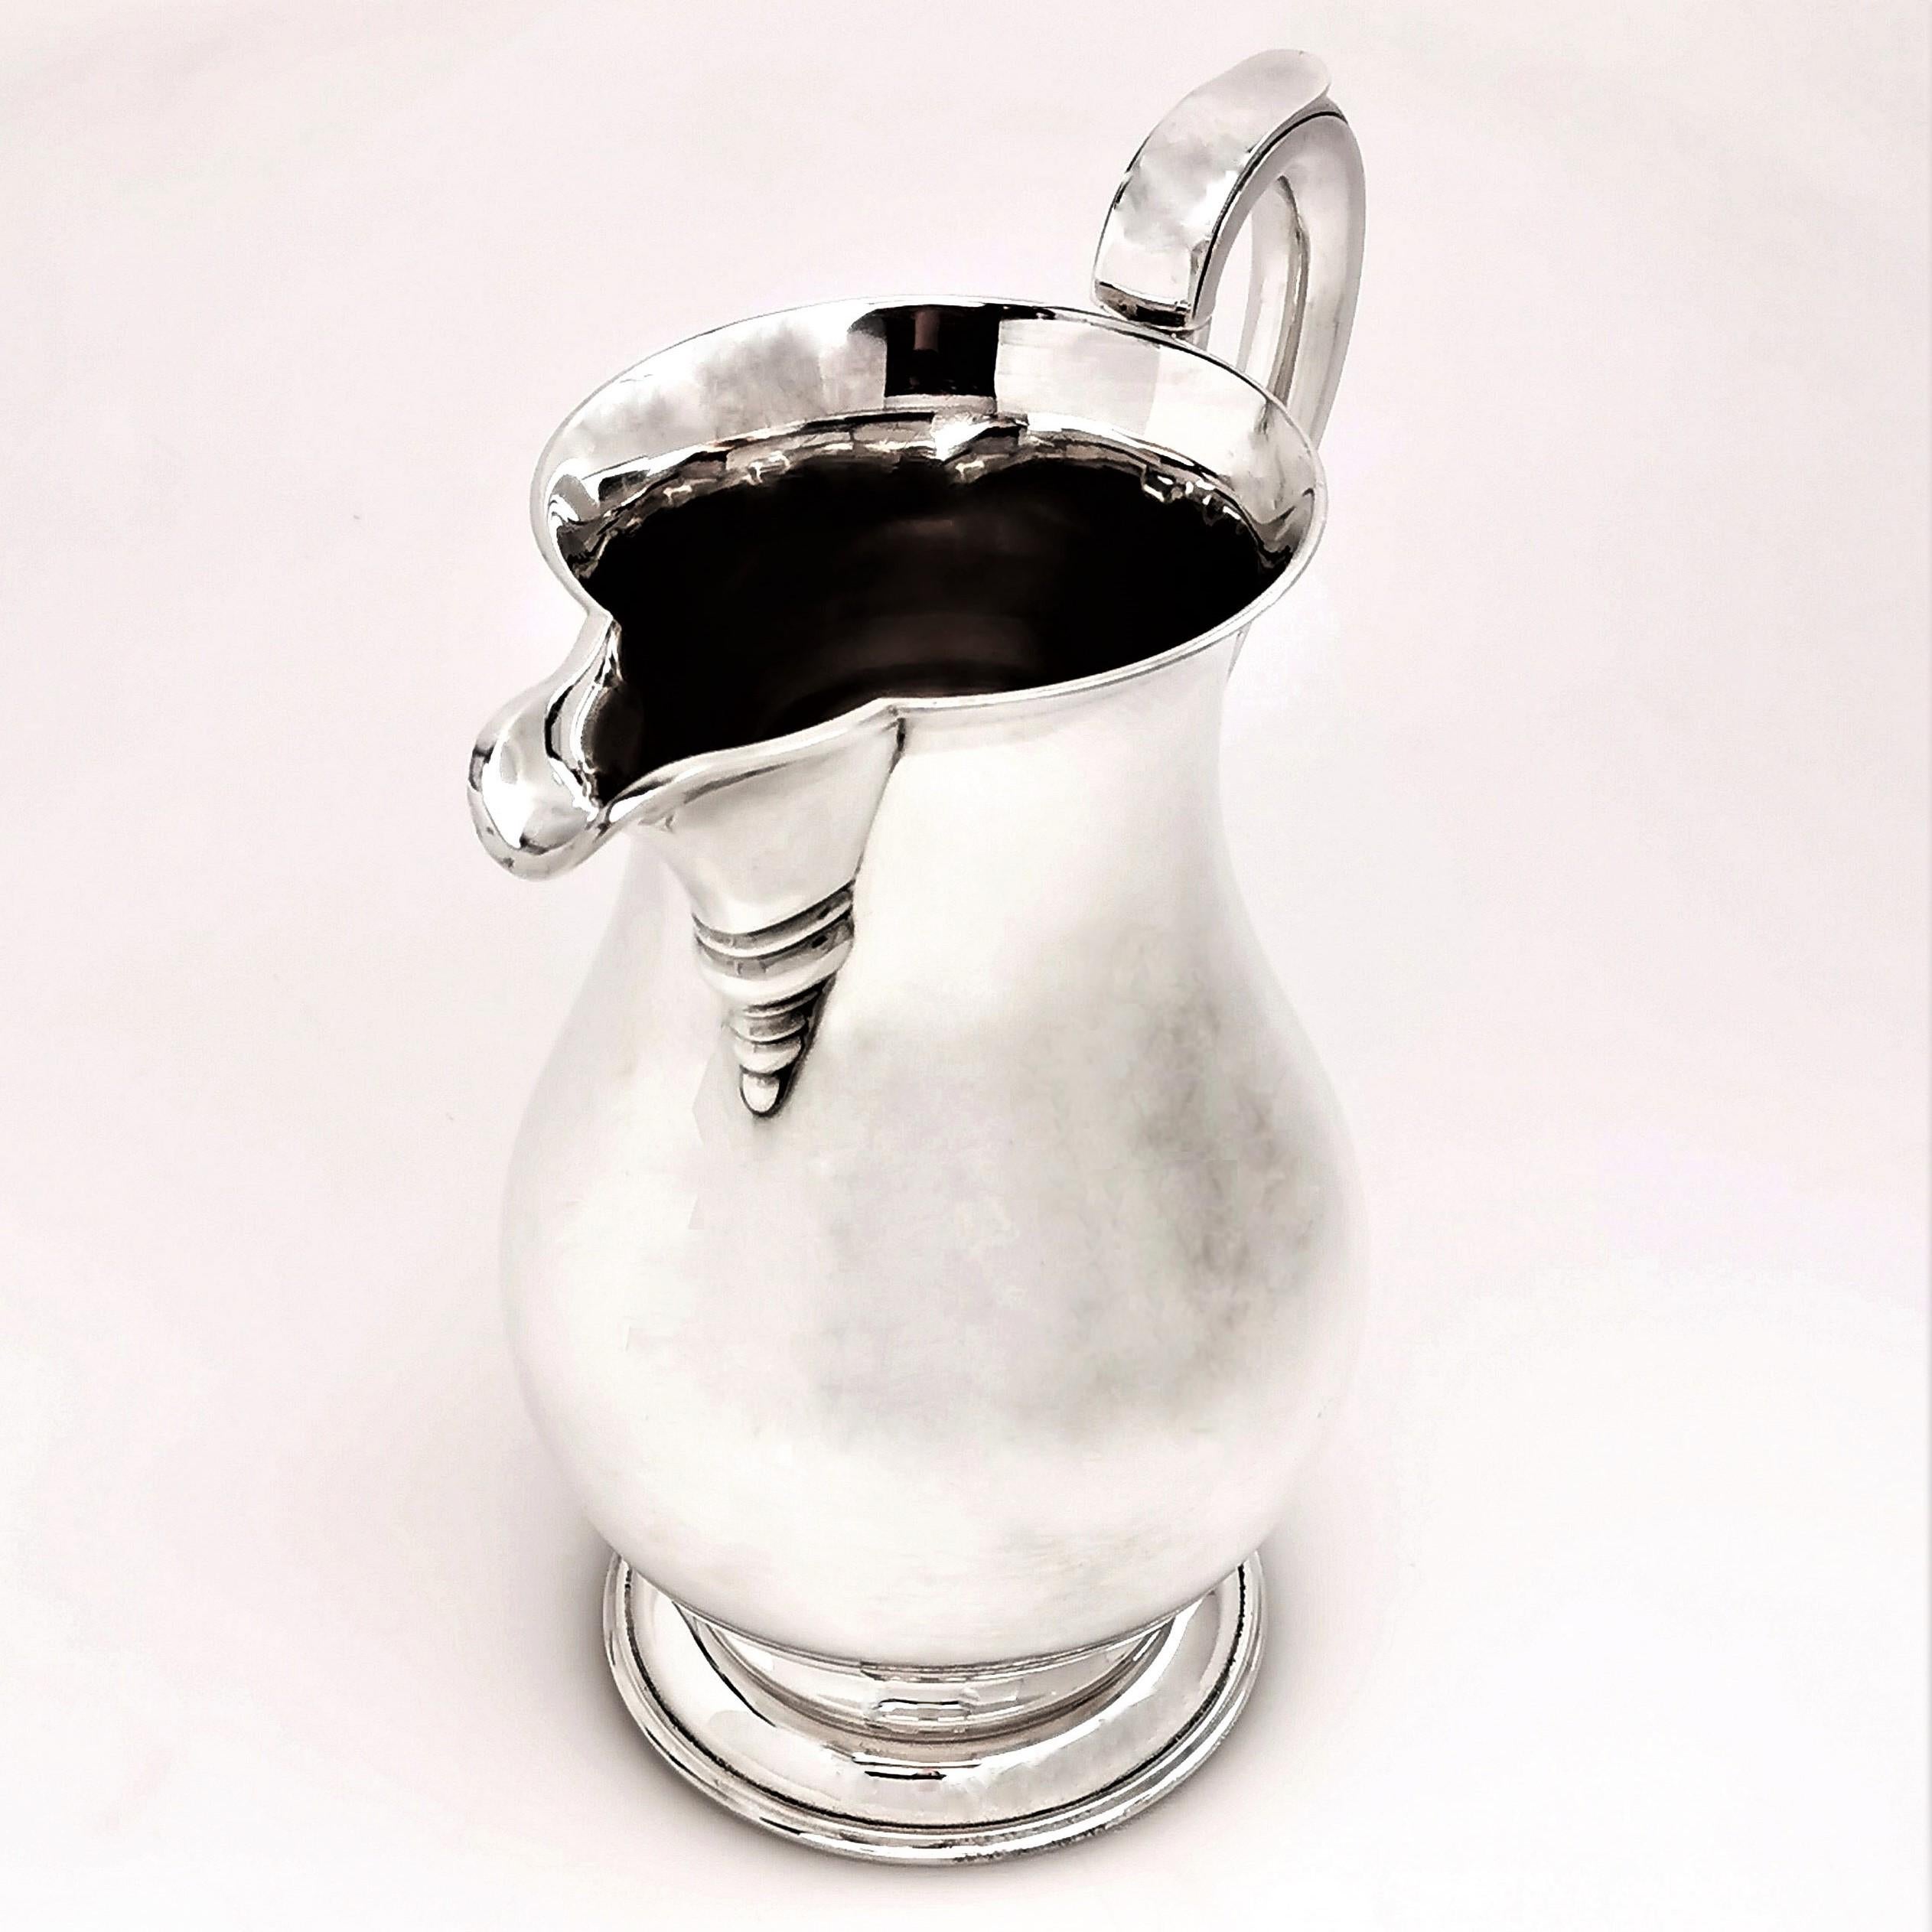 A Classic solid Silver Jug in a plain, highly polished baluster form. This Georgian style beer Jug stands on a spread pedestal foot and has a scroll handle. This Jug is of a large size, suitable for beer, water or cocktails.

Made in London in 1969